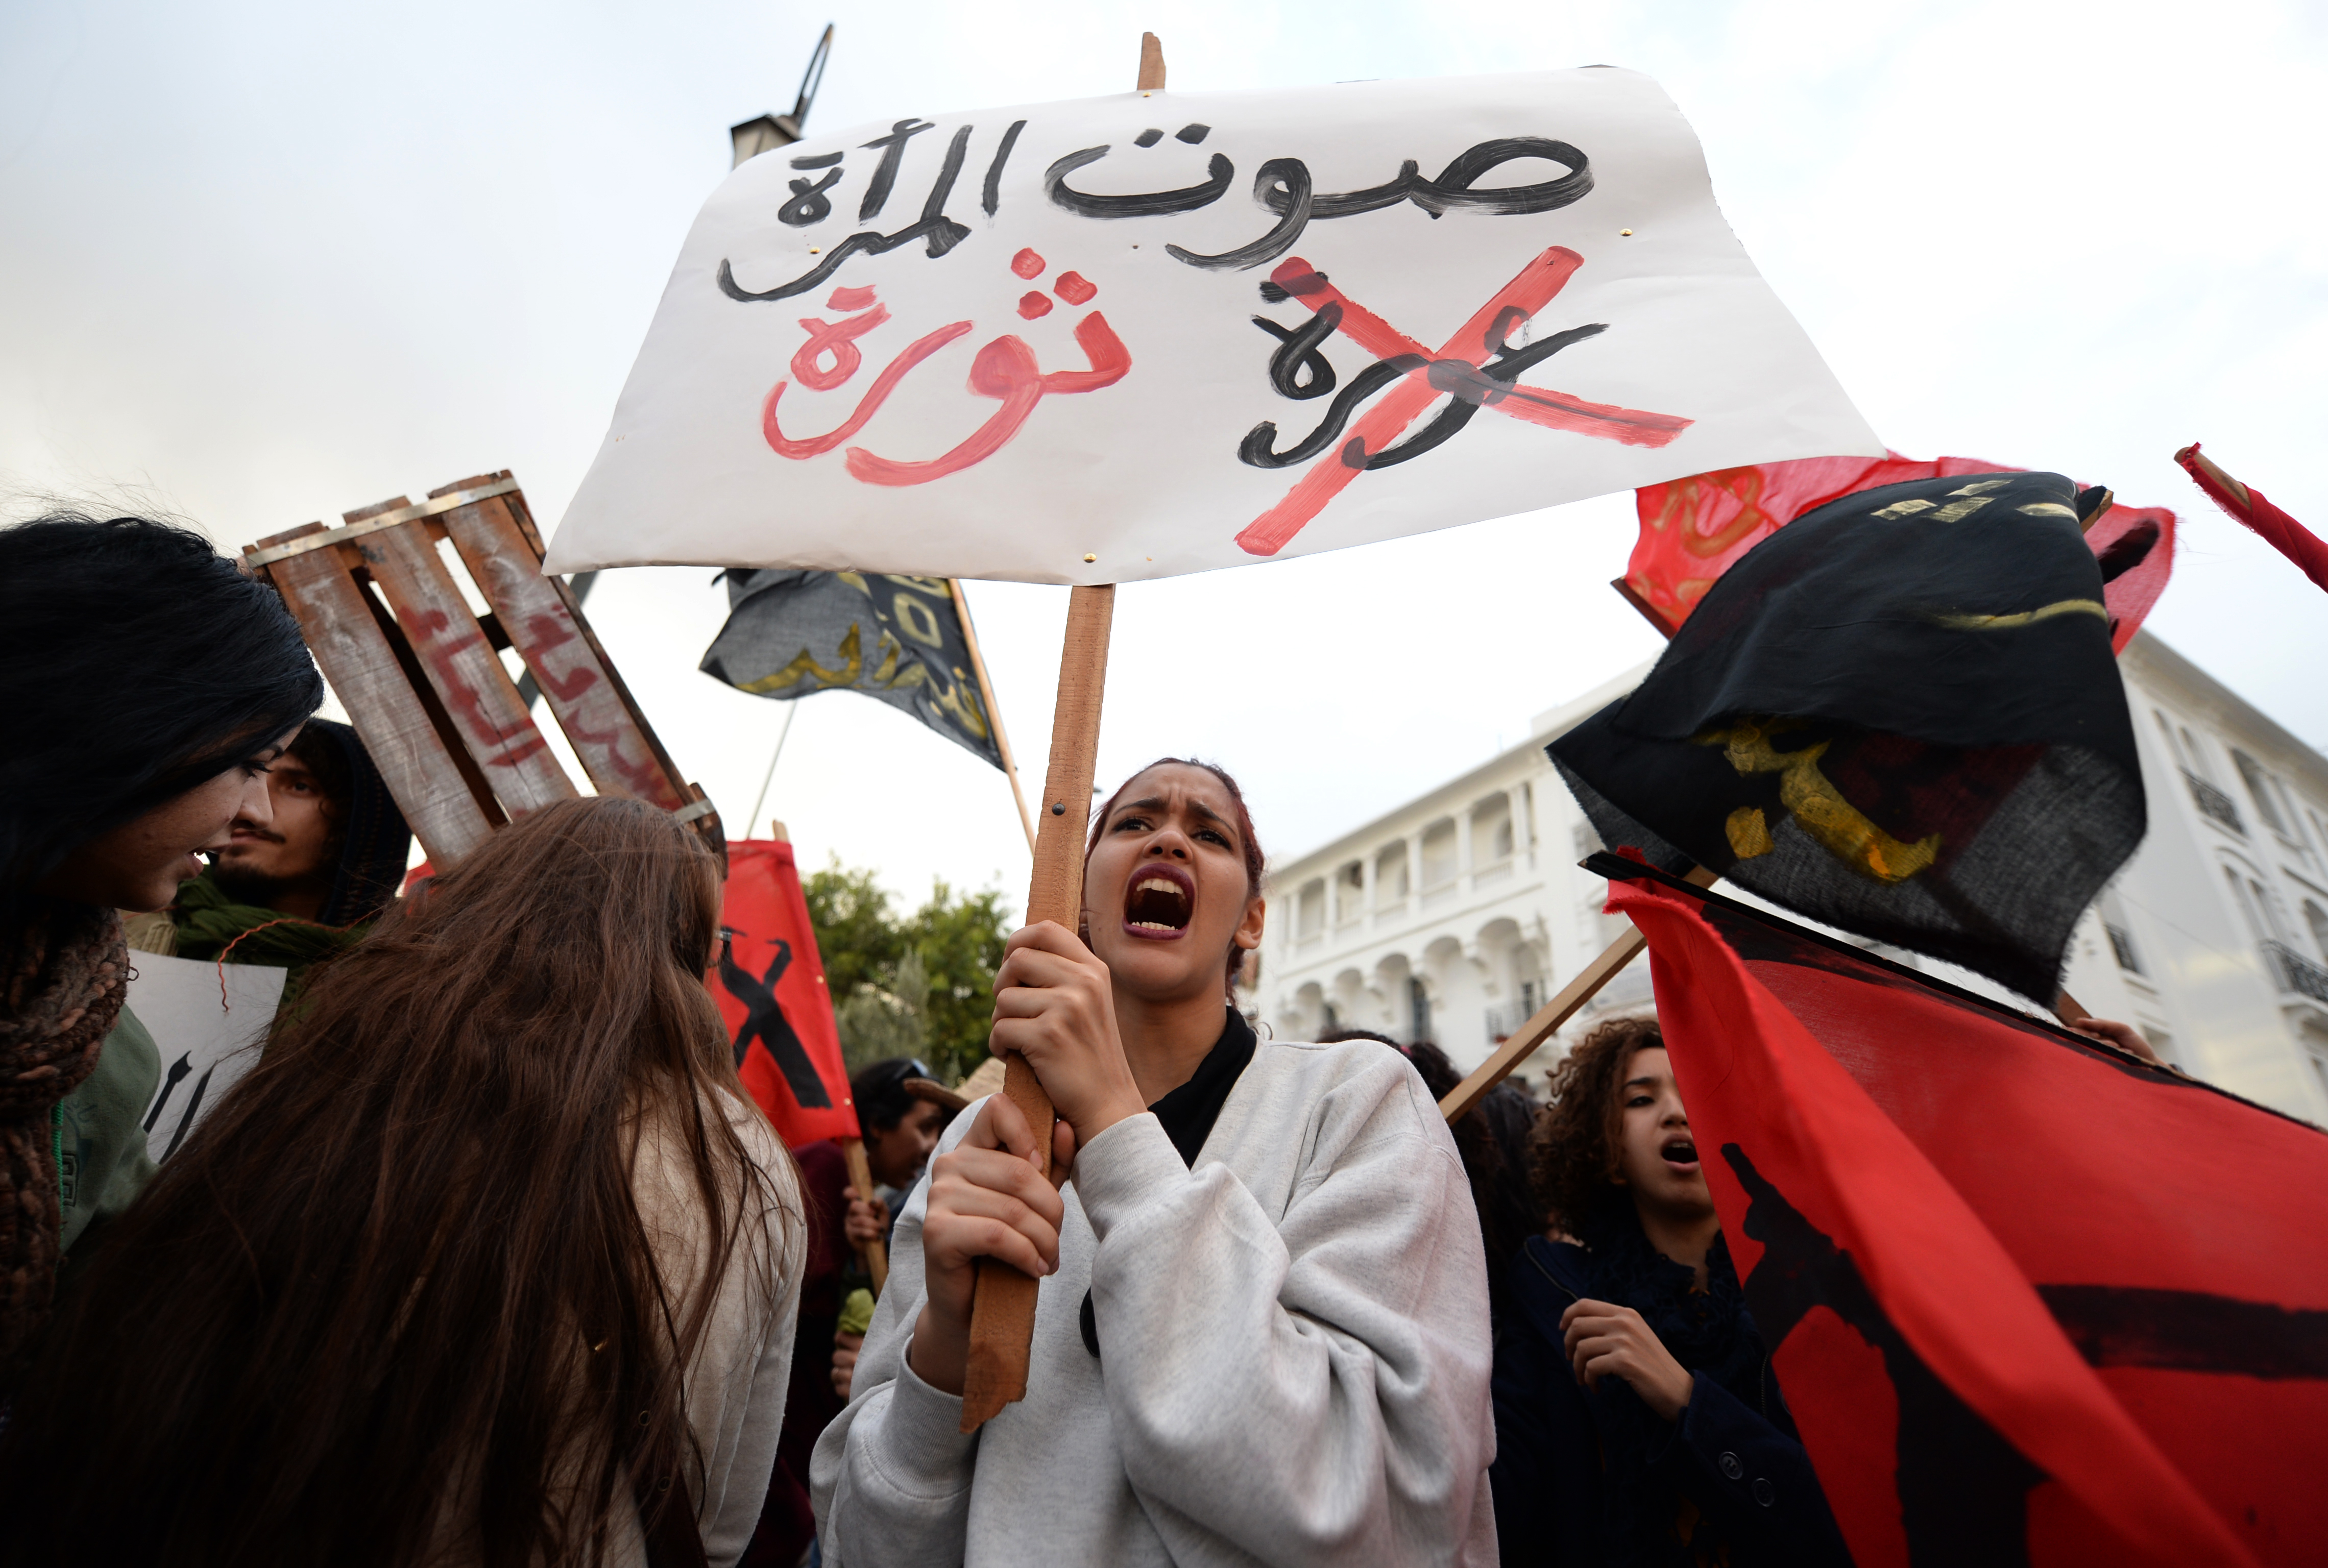 In Pictures The Women Driving Protests Across The Arab World Middle East Eye